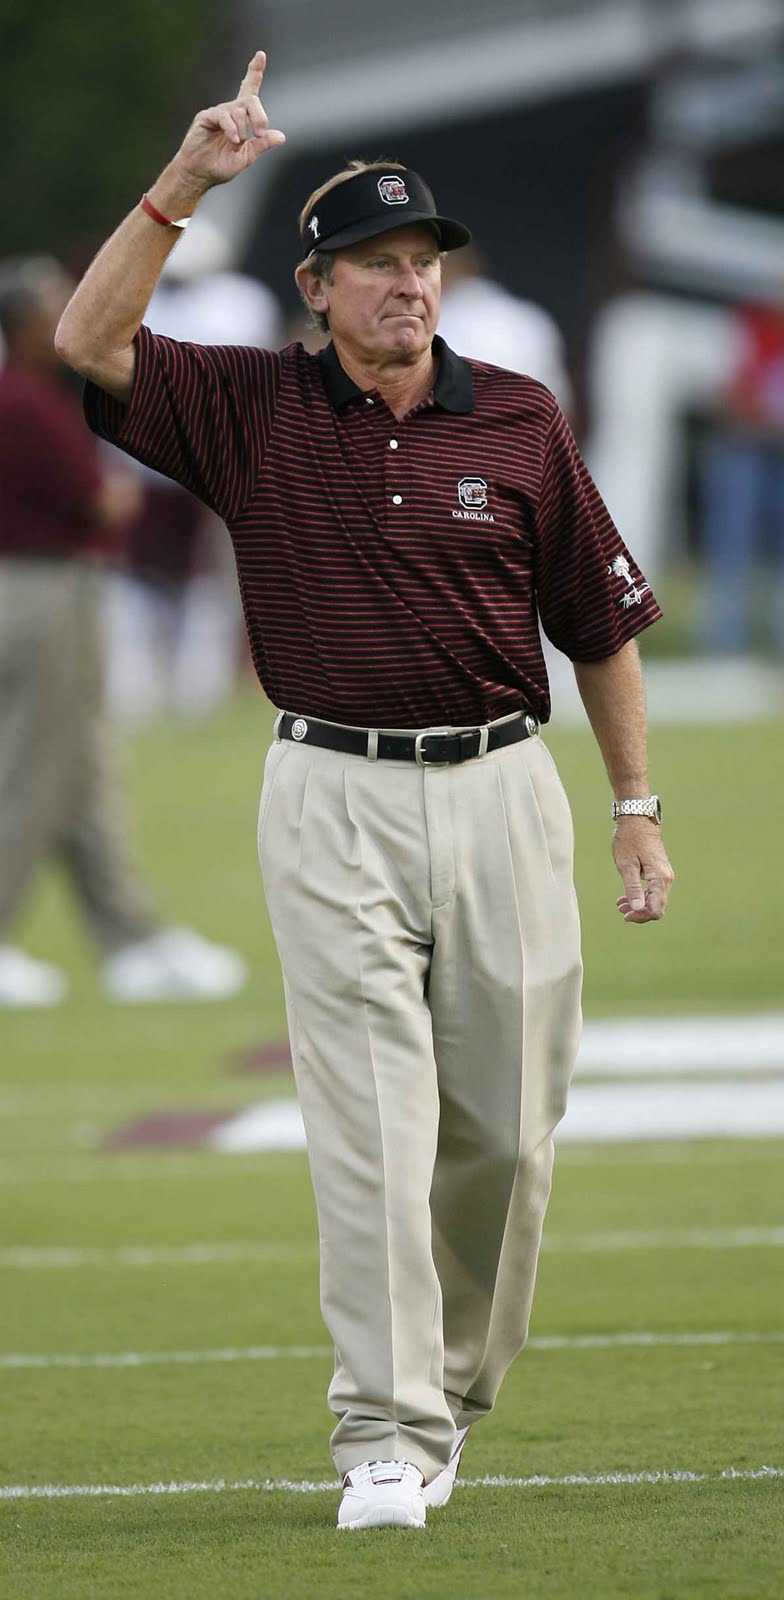 Steve Spurrier has used oversigning to elevate South Carolina's overall talent